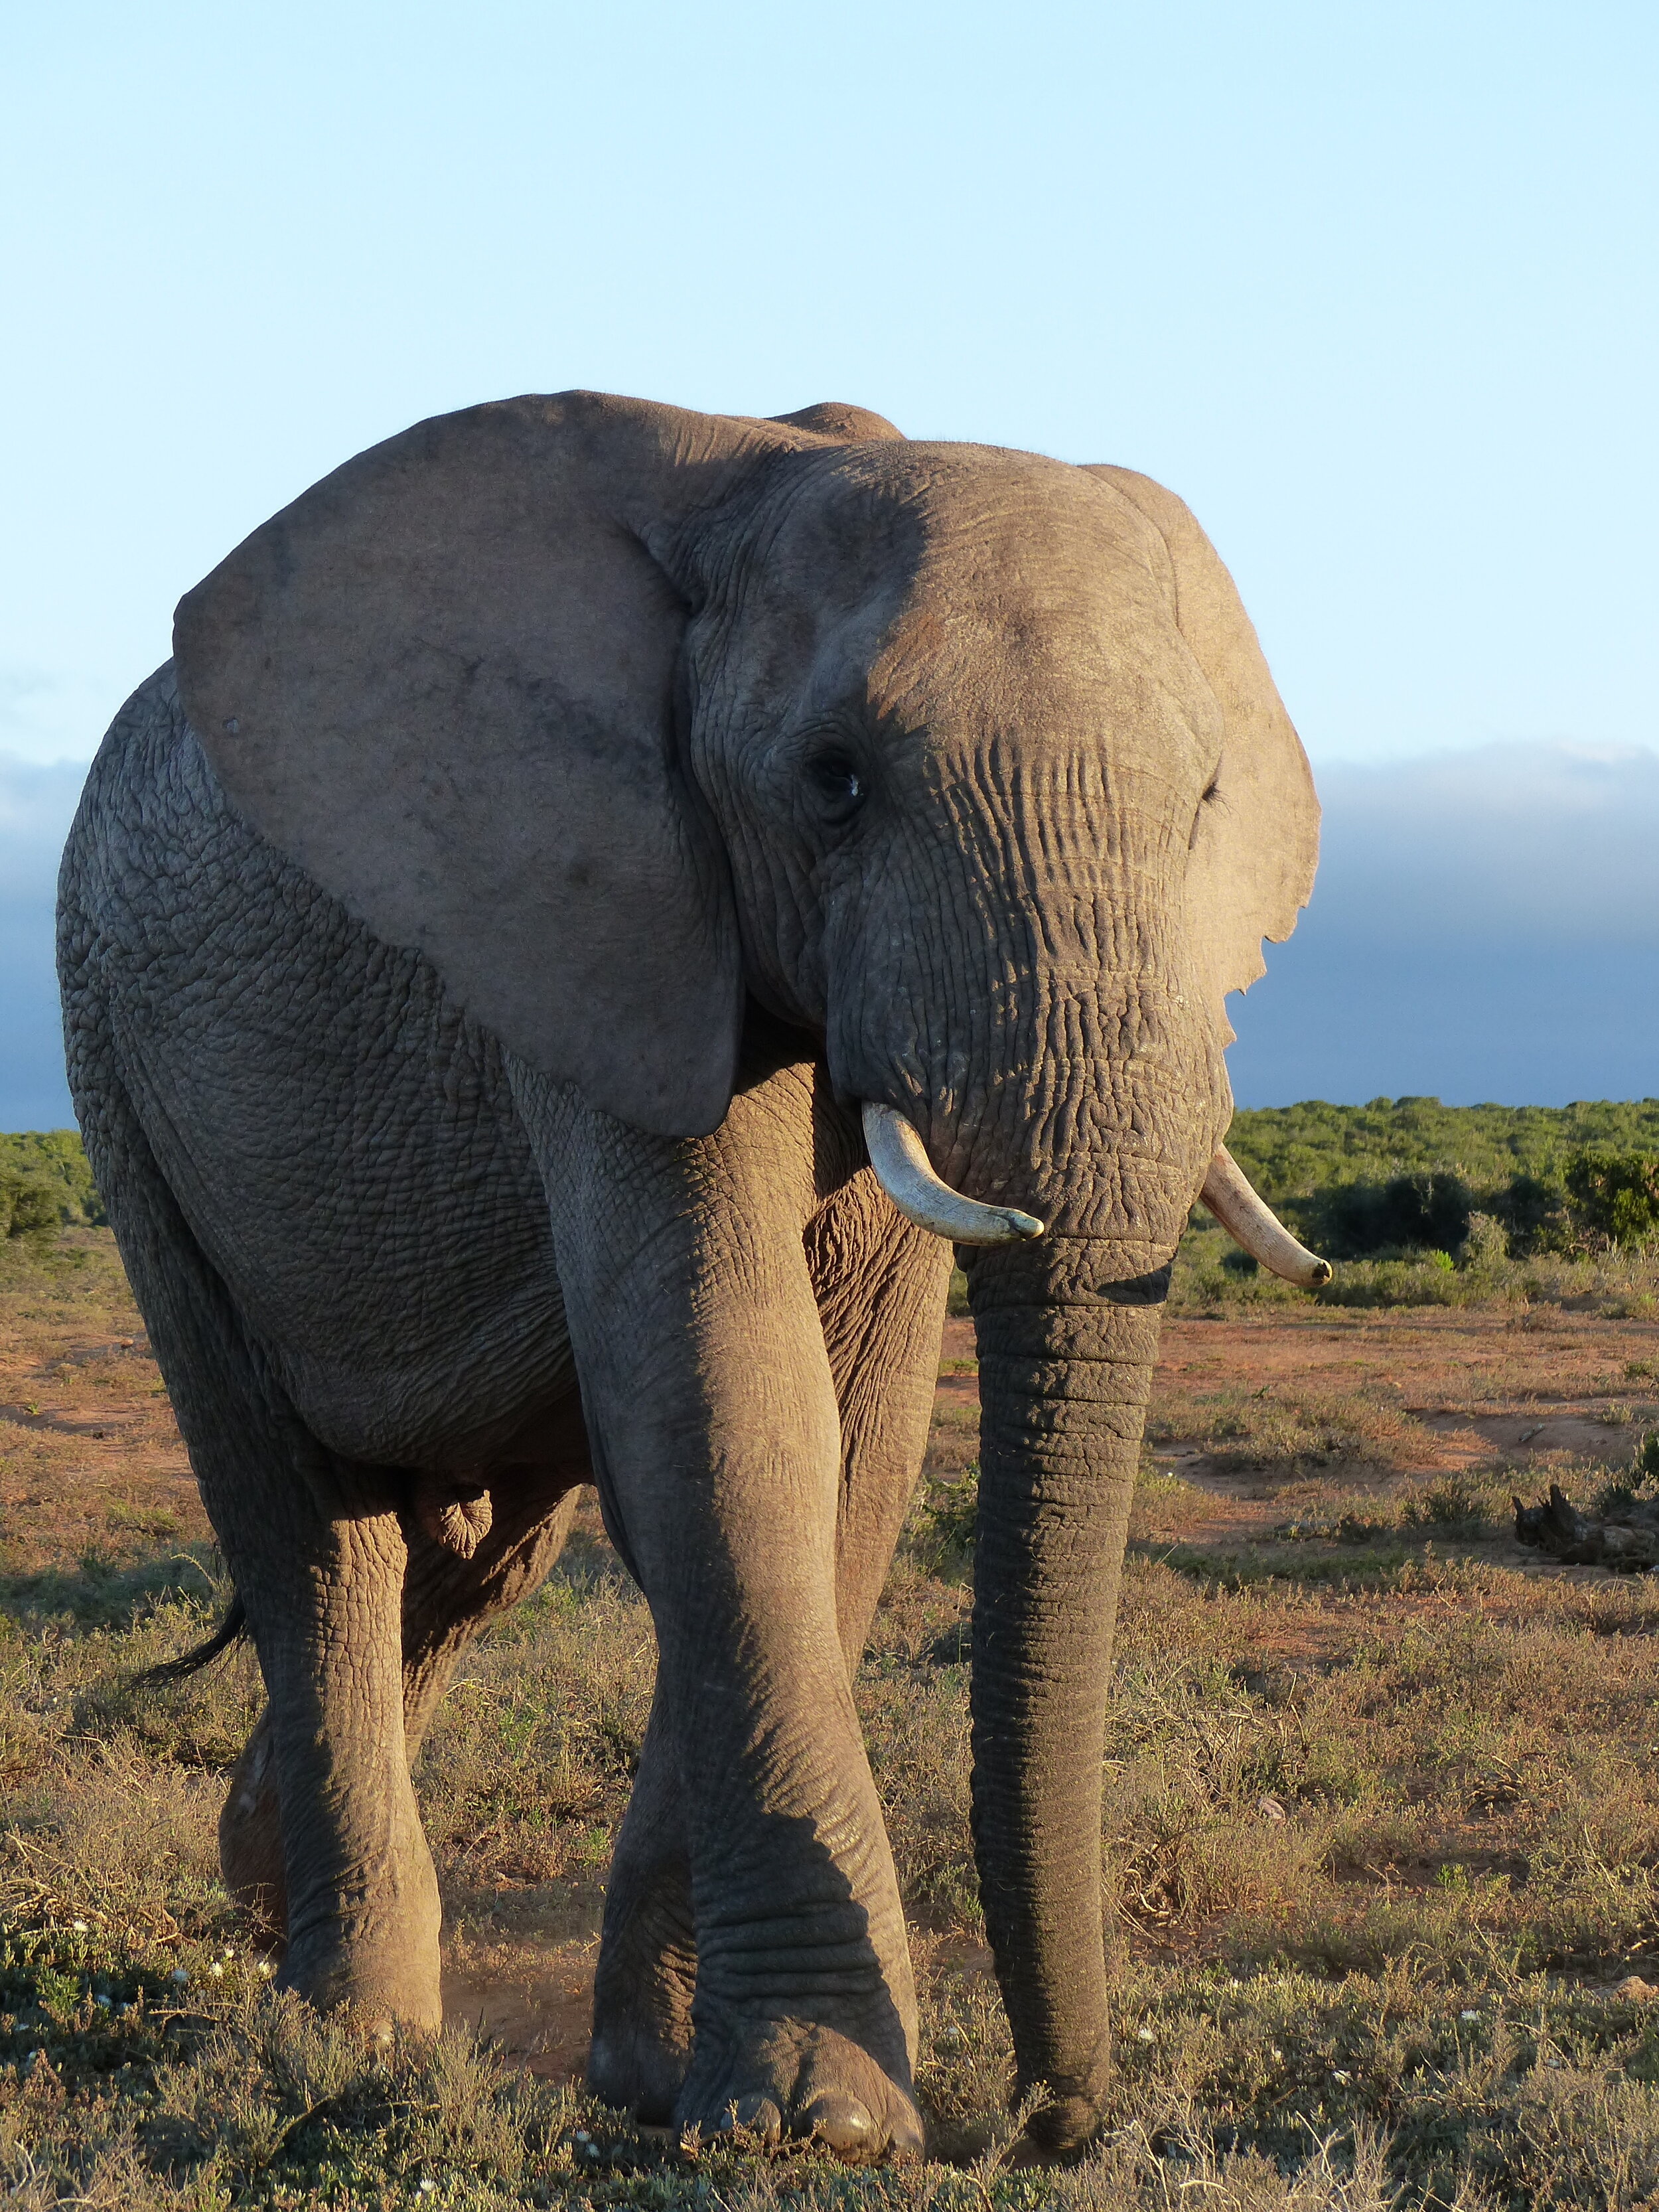 An Elephant at ADDO